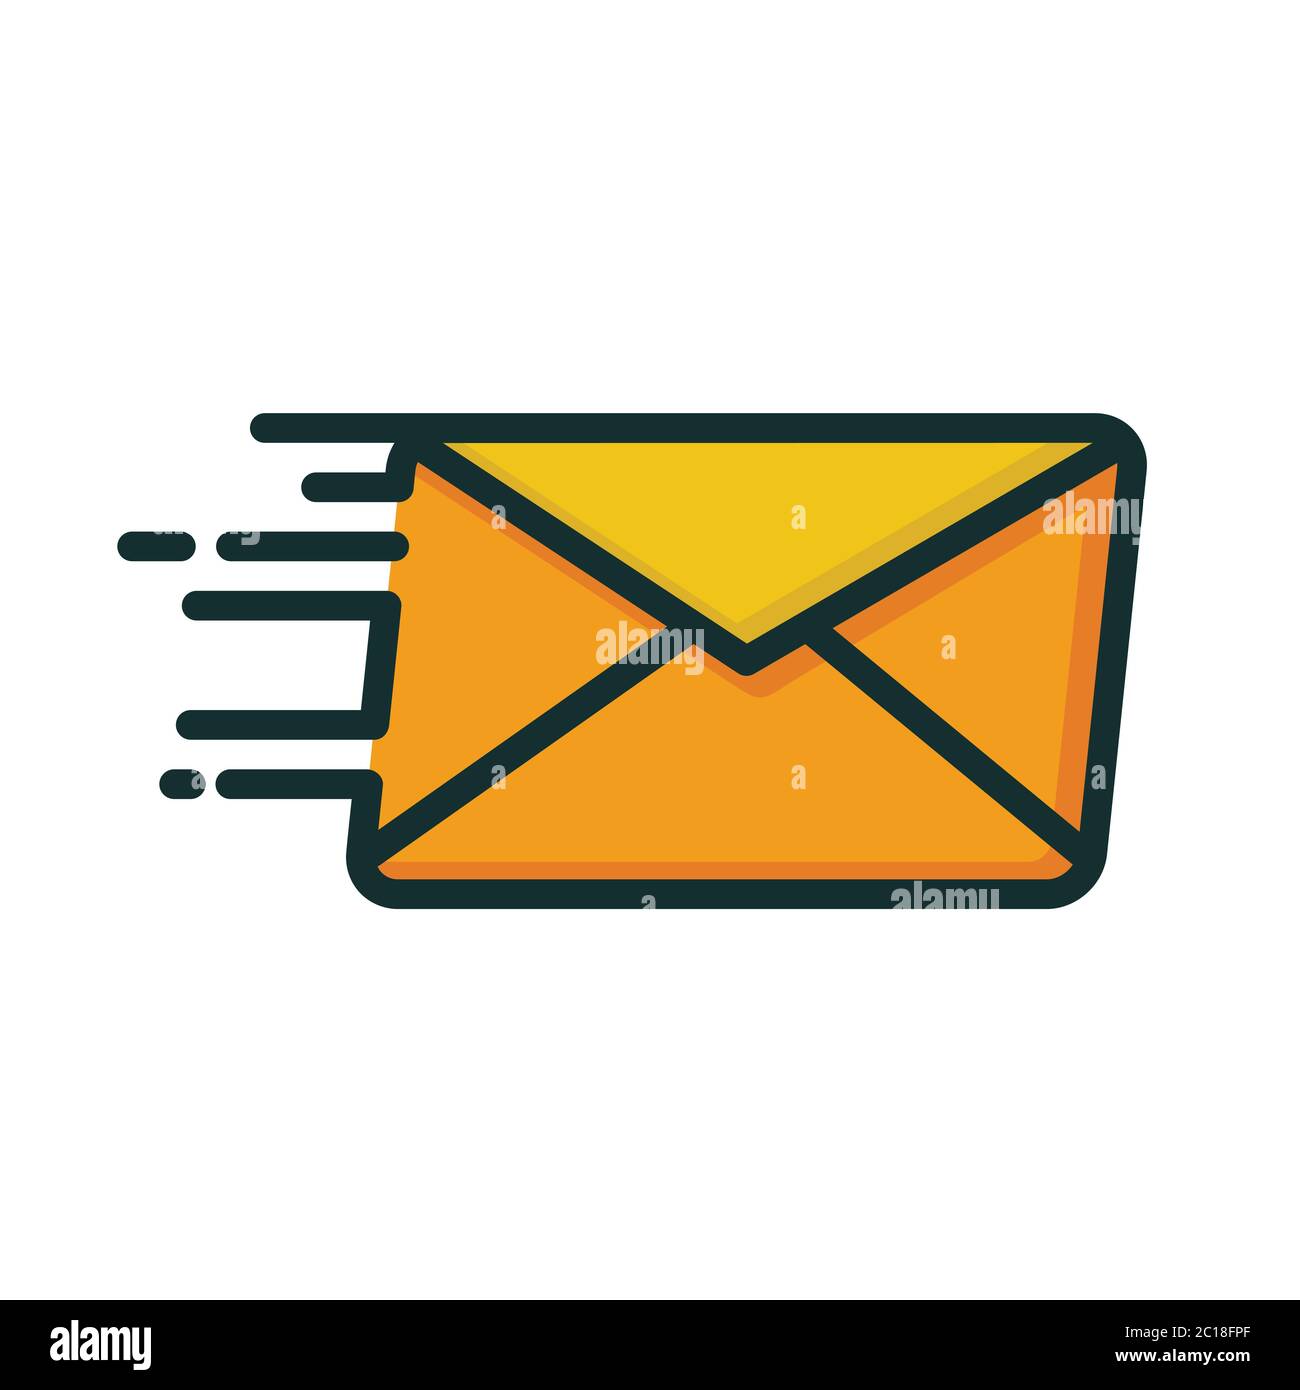 Simple flat Sending message icon with bold outline. Suitable for vector illustration of delivering message service technology. Stock Vector